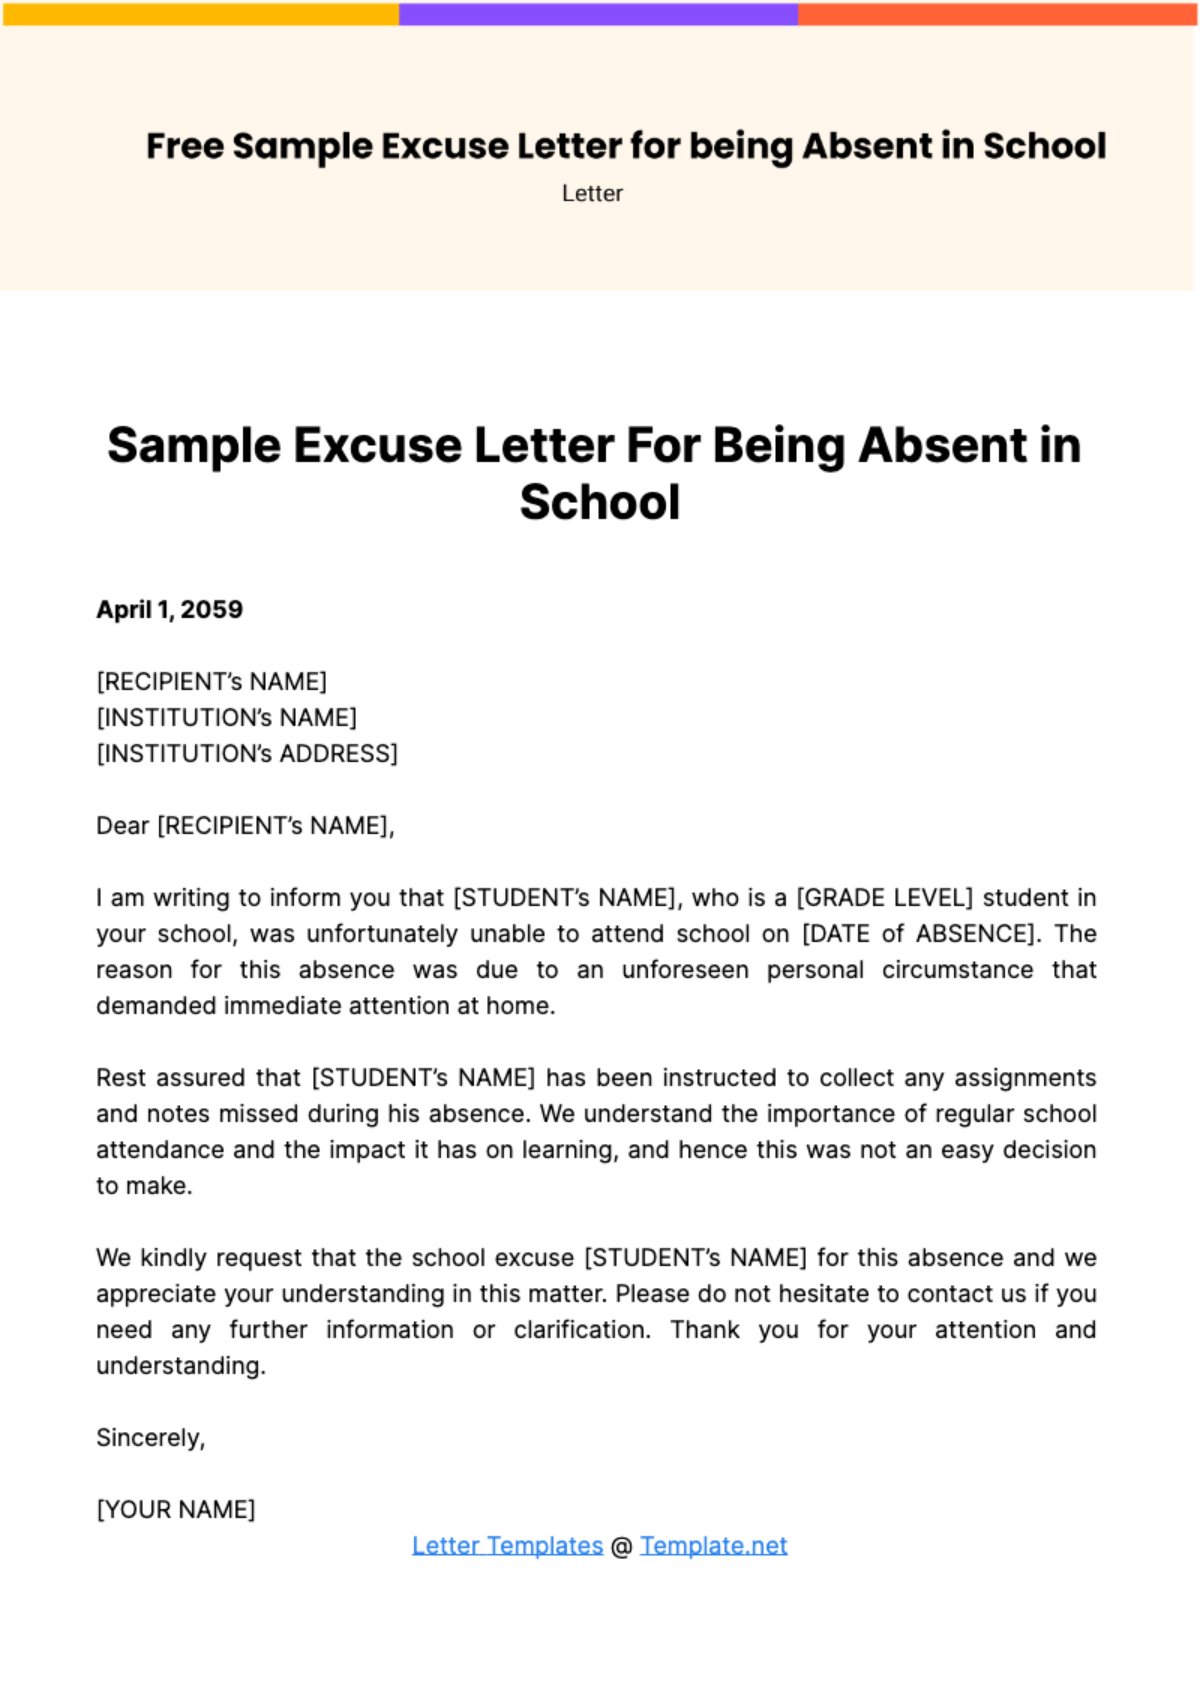 Sample Excuse Letter for being Absent in School Template